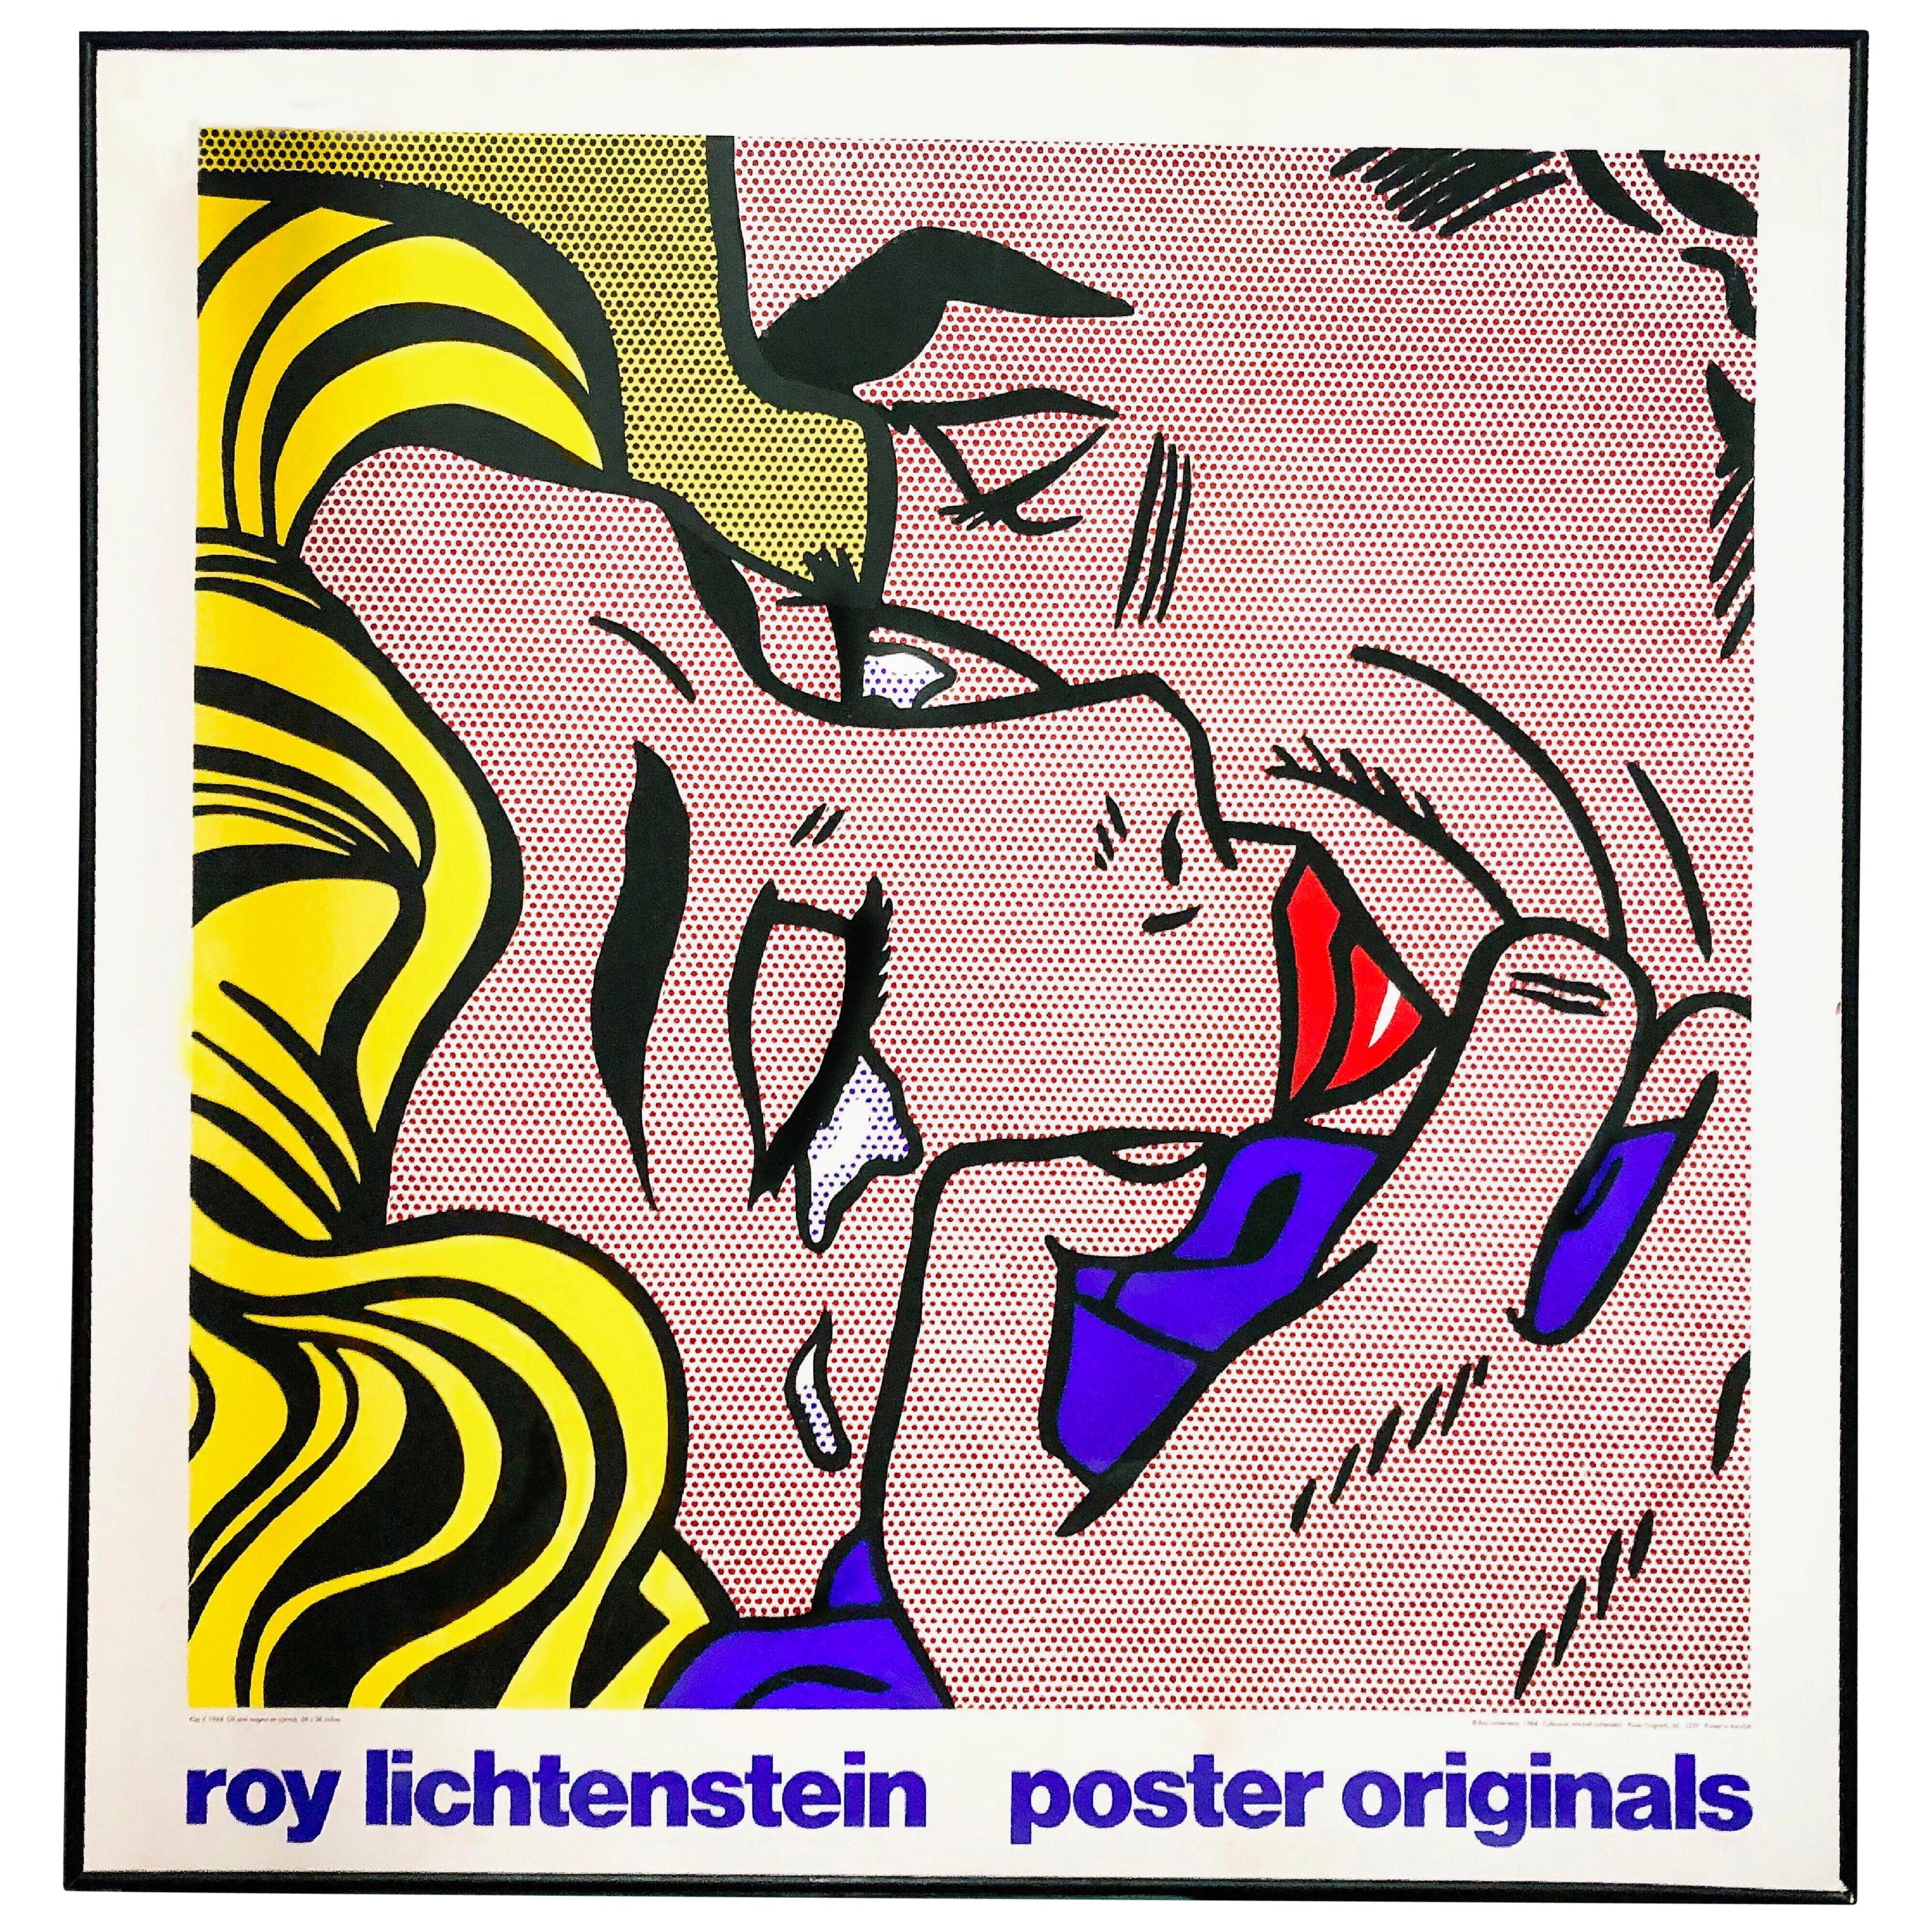 Stunning silk screen print from the limited 1990 run authorized by Lichtenstein’s estate after his iconic painting Kiss V (1964). Very good vintage condition. Minor age appropriate wear like slight darkening near the bottom edge of image right